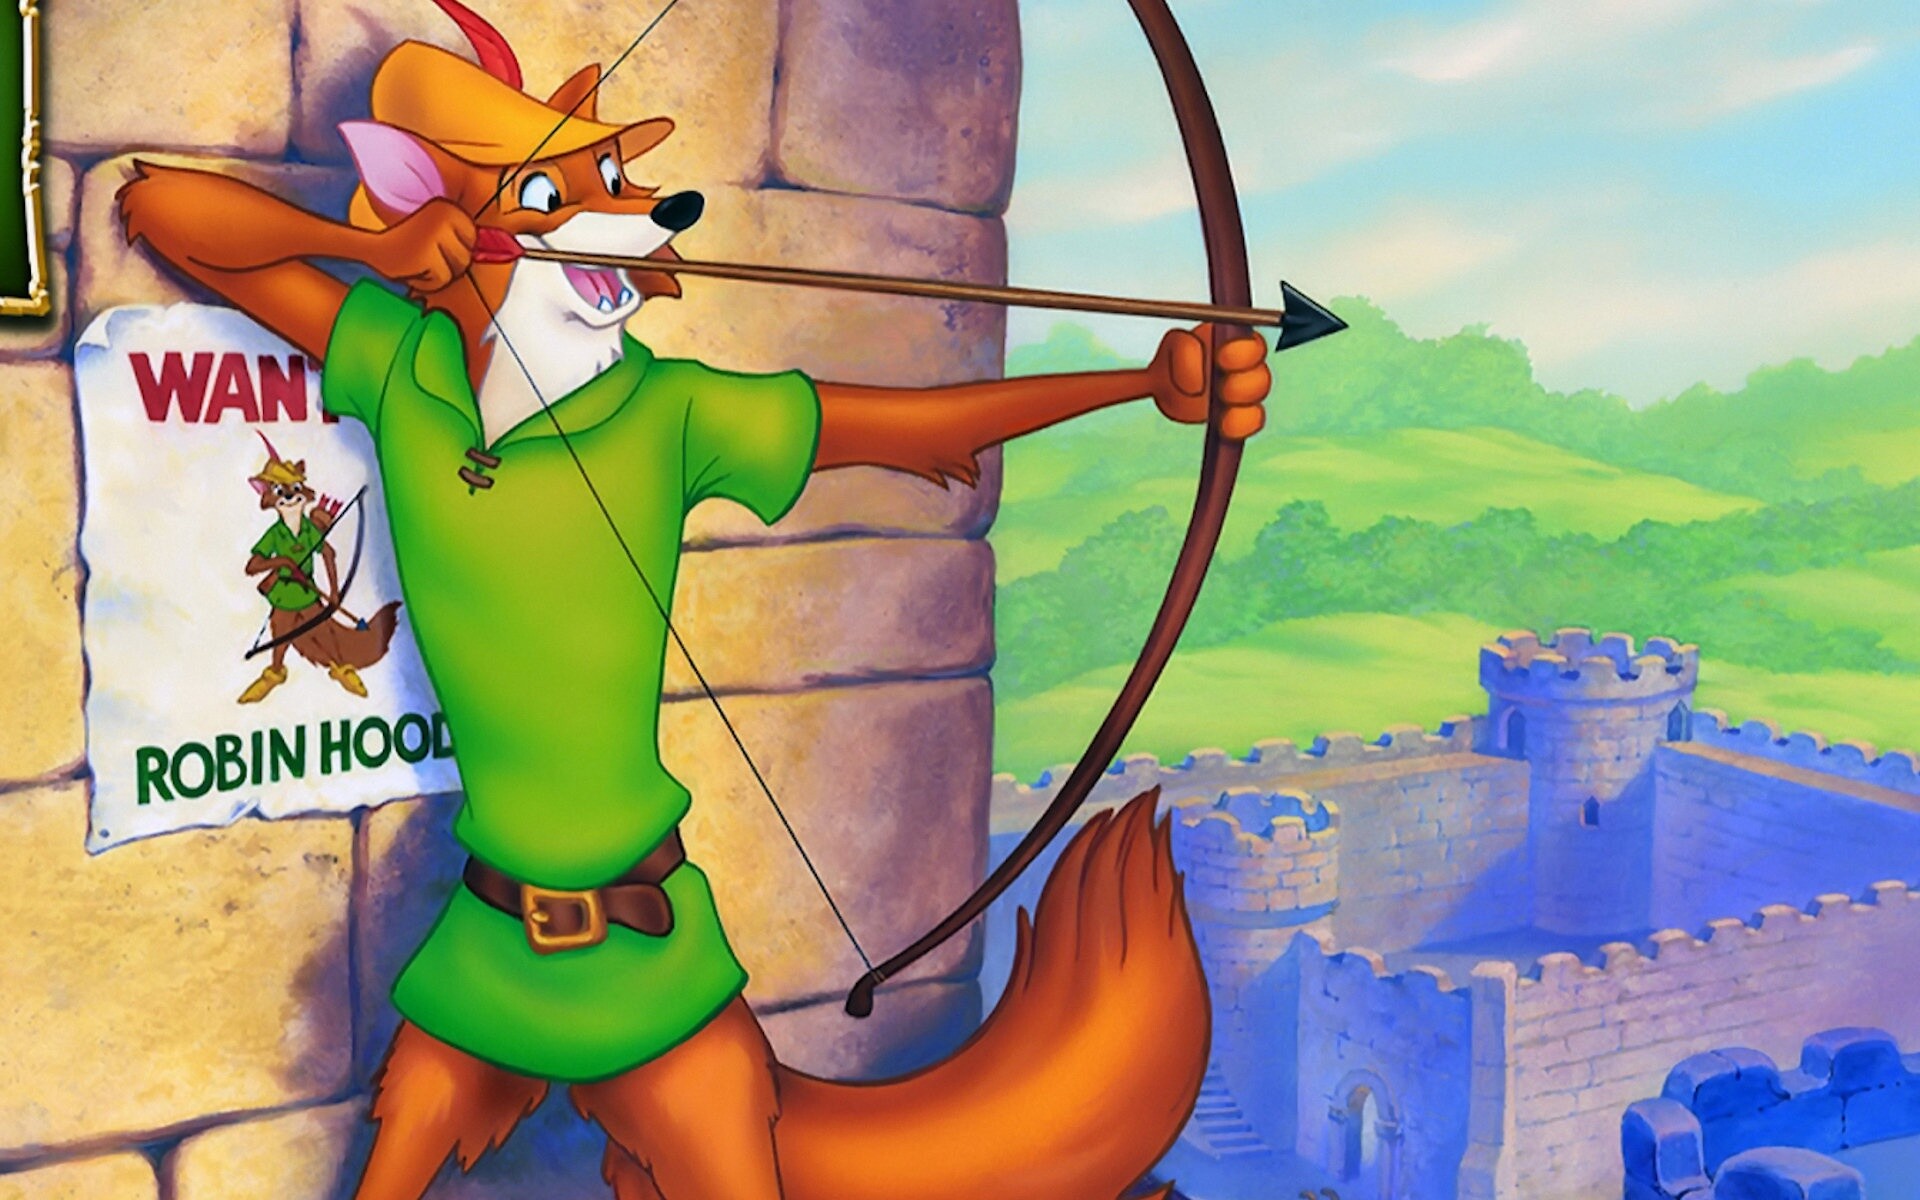 Robin Hood (Cartoon): The 21st Disney animated feature film and the first entirely "post-Walt" animated feature. 1920x1200 HD Wallpaper.